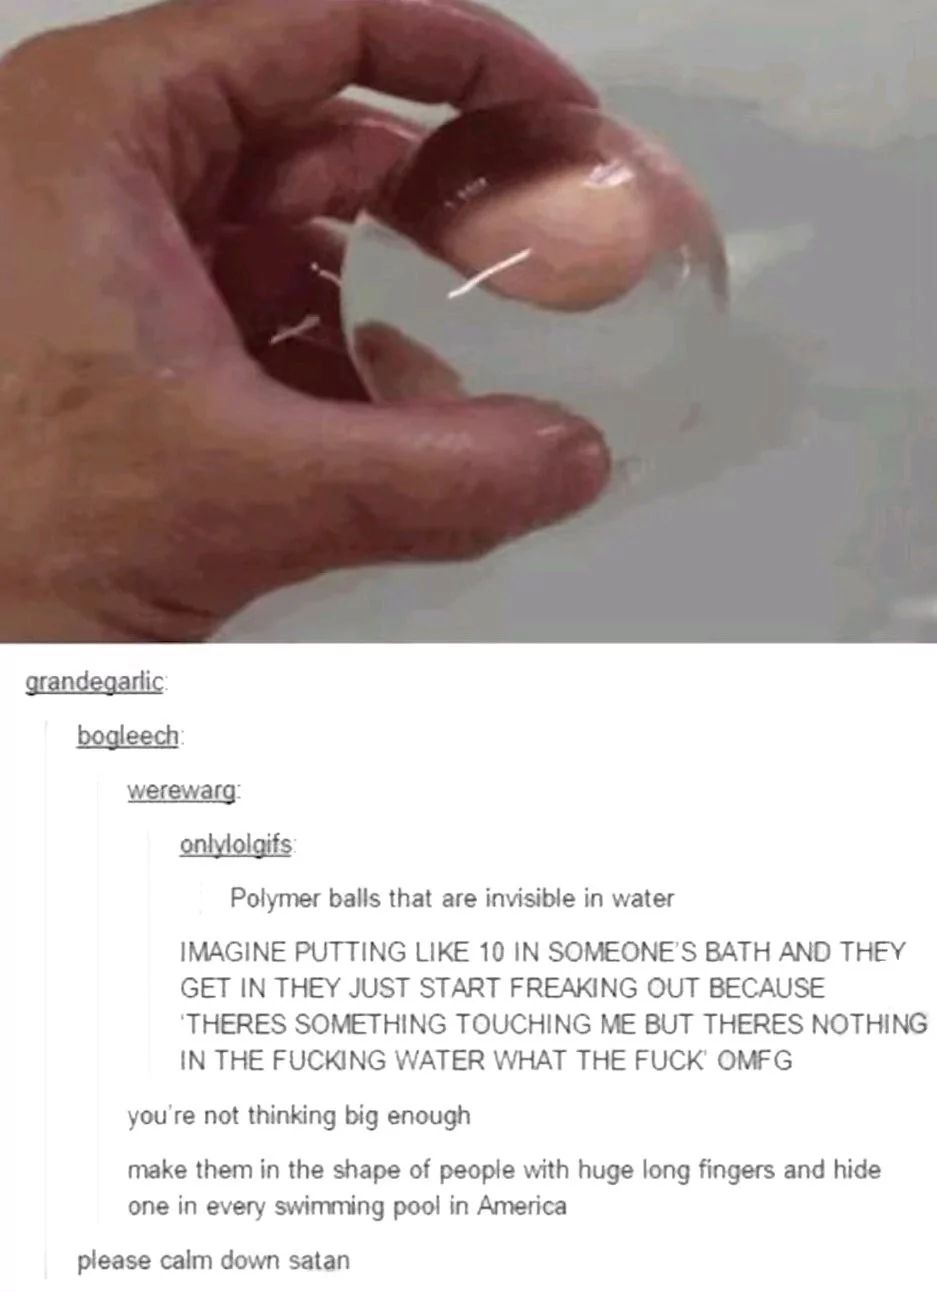 grandegarlic
bogleech
werewarg
onlylolgifs
Polymer balls that are invisible in water
IMAGINE PUTTING LIKE 10 IN SOMEONE'S BATH AND THEY
GET IN THEY JUST START FREAKING OUT BECAUSE
THERES SOMETHING TOUCHING ME BUT THERES NOTHING
IN THE FUCKING WATER WHAT THE FUCK OMFG
you're not thinking big enough
make them in the shape of people with huge long fingers and hide
one in every swimming pool in America
please calm down satan